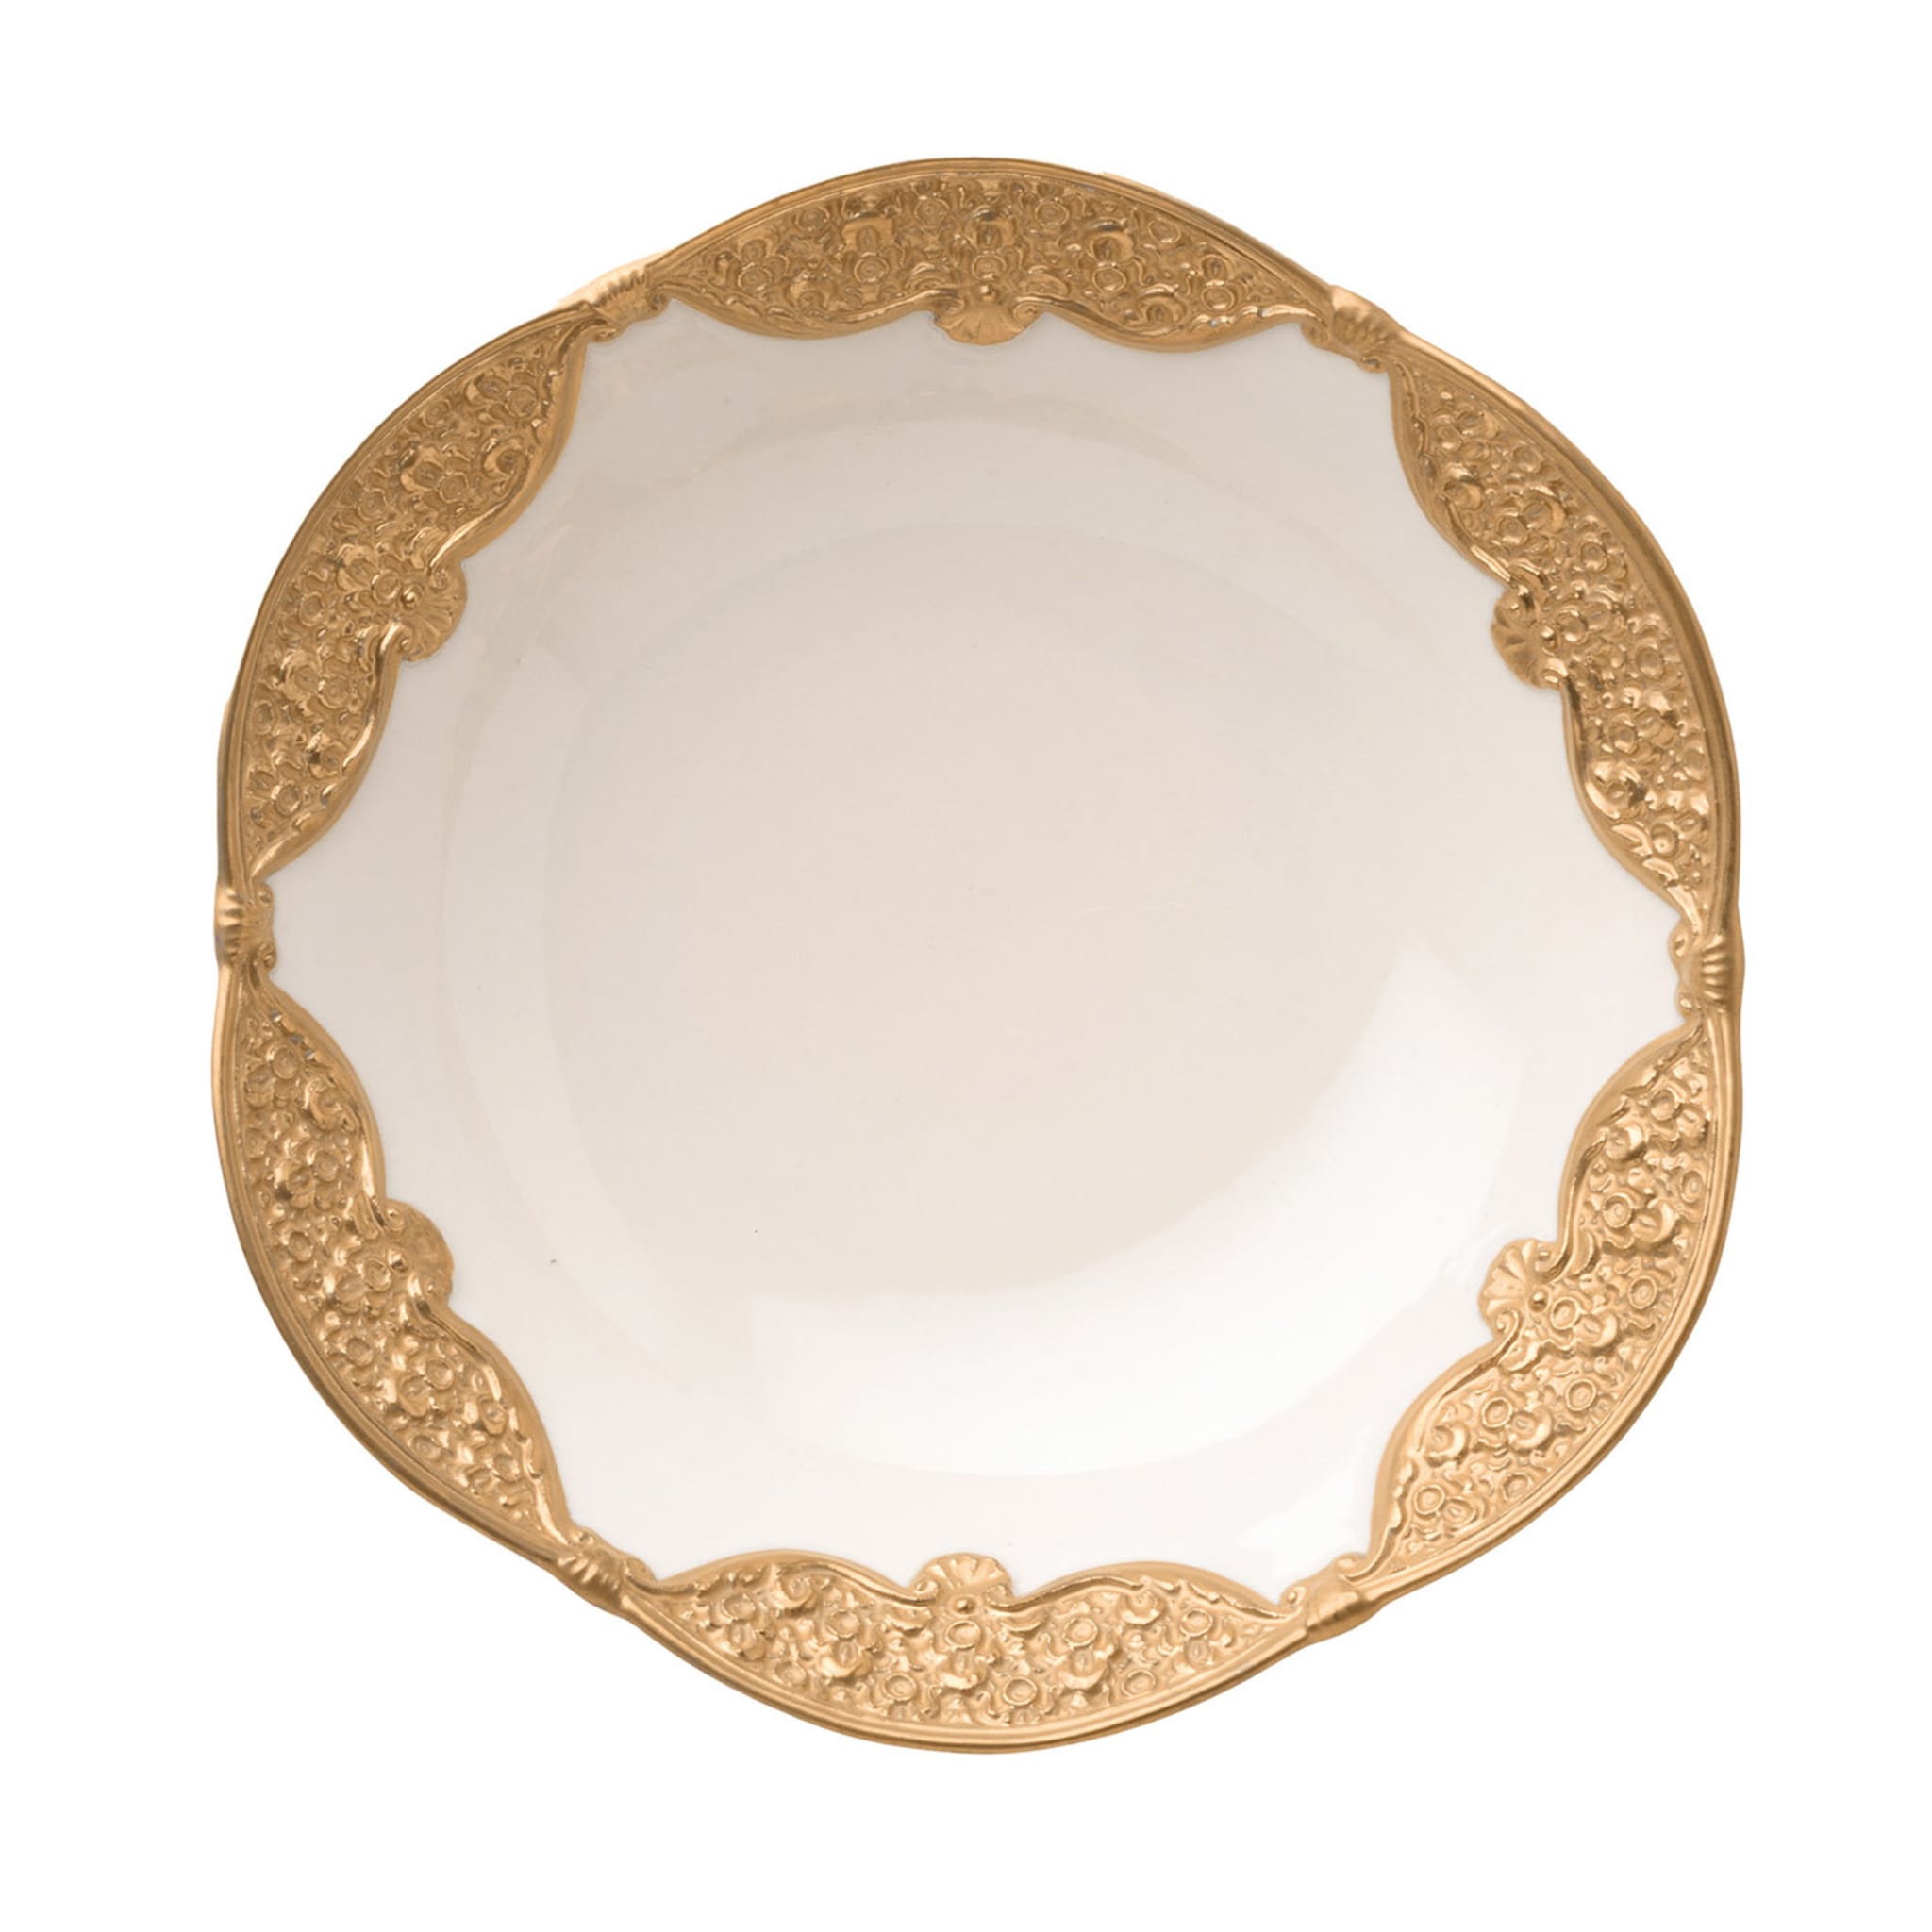 Caterina Set of 2 White & Gold Bowls - Main view